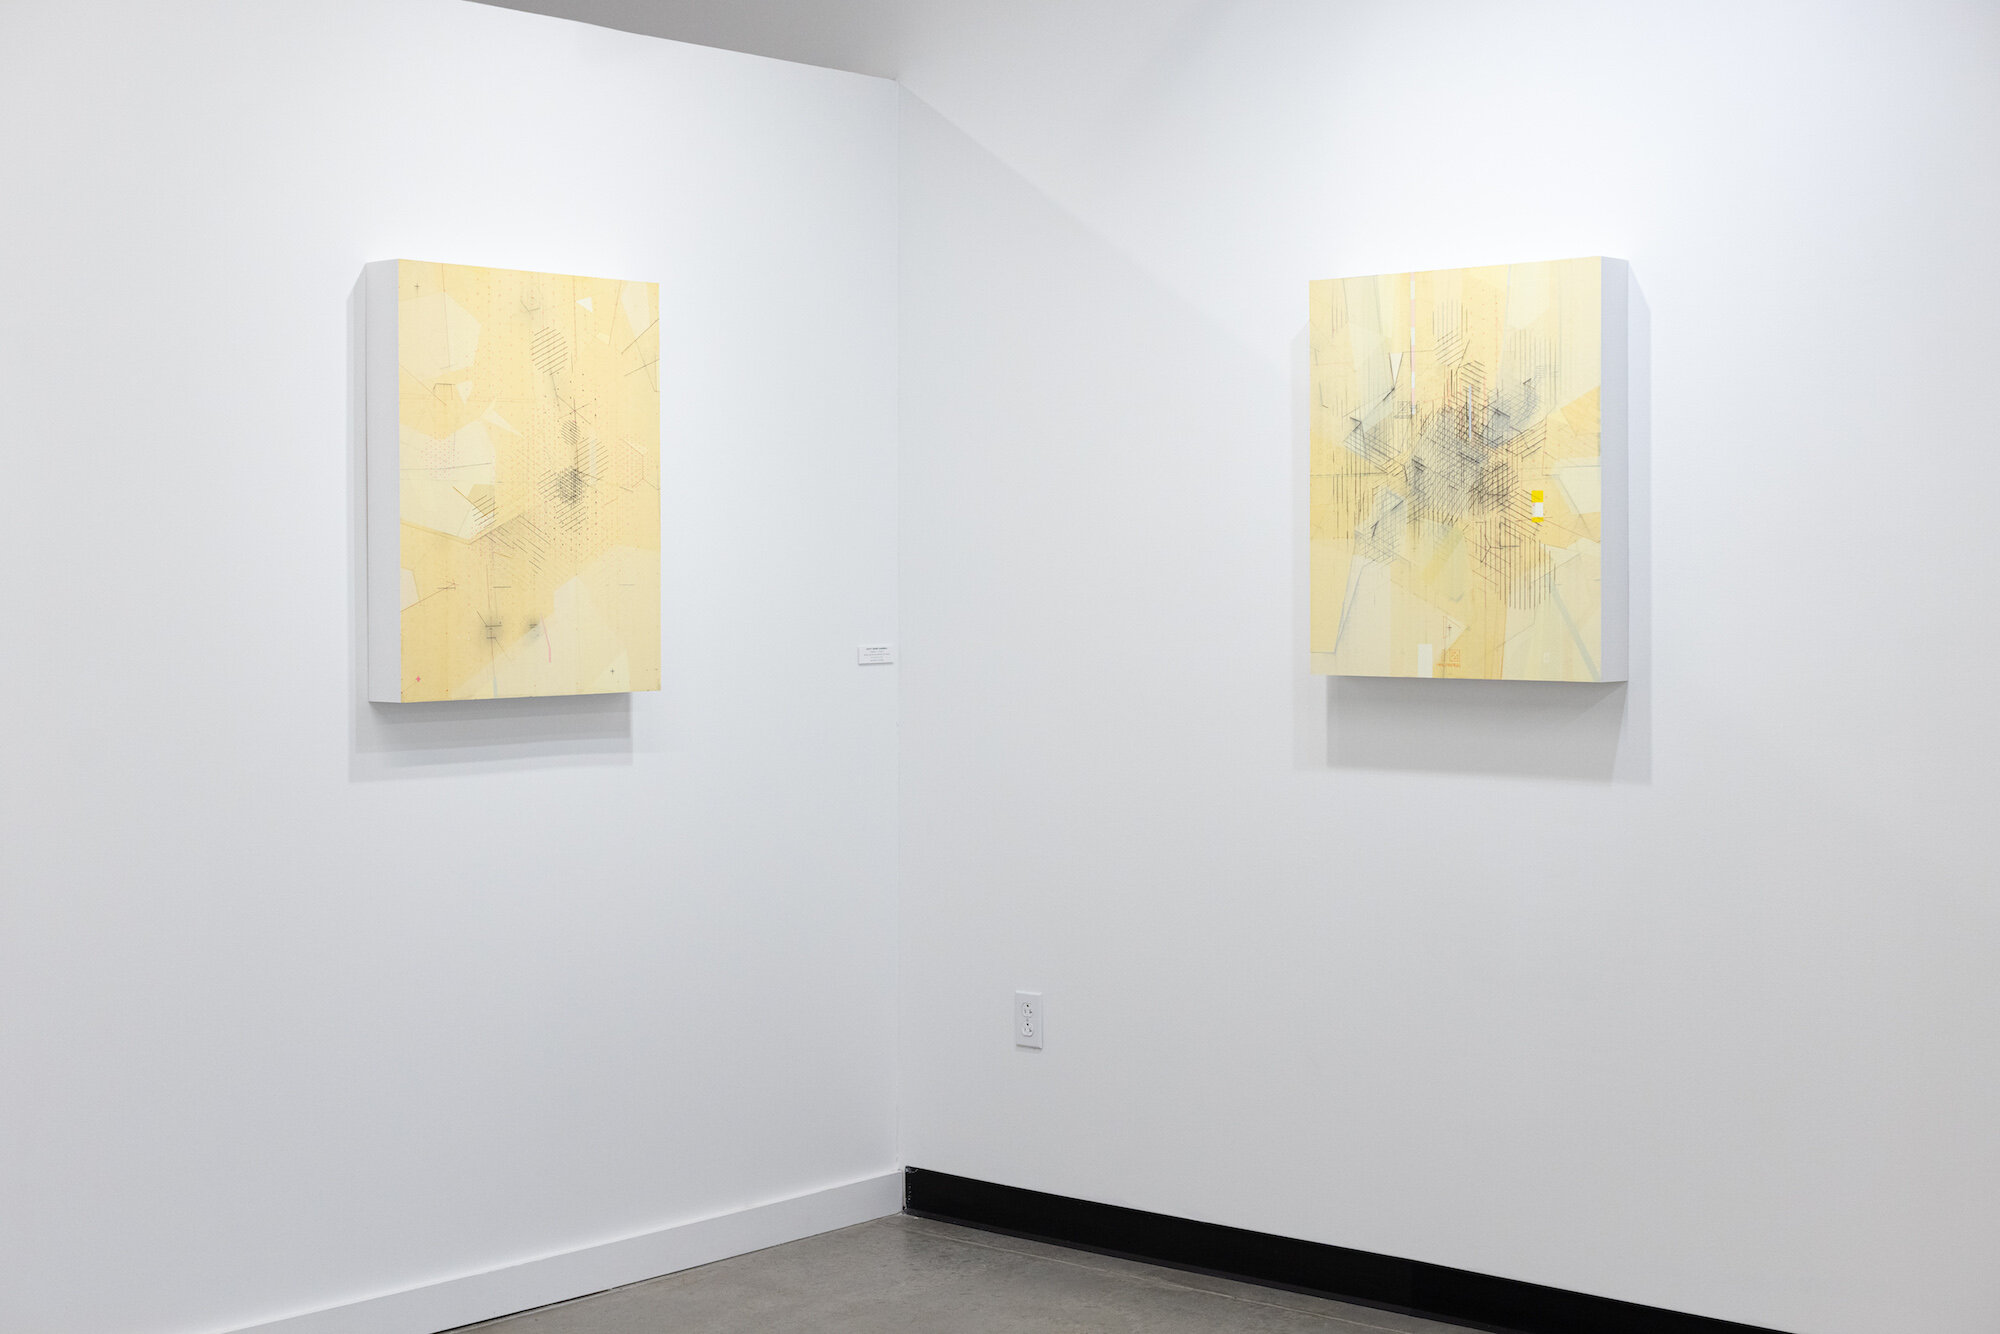 Installation View of "Resist" @ Soapbox Arts Gallery